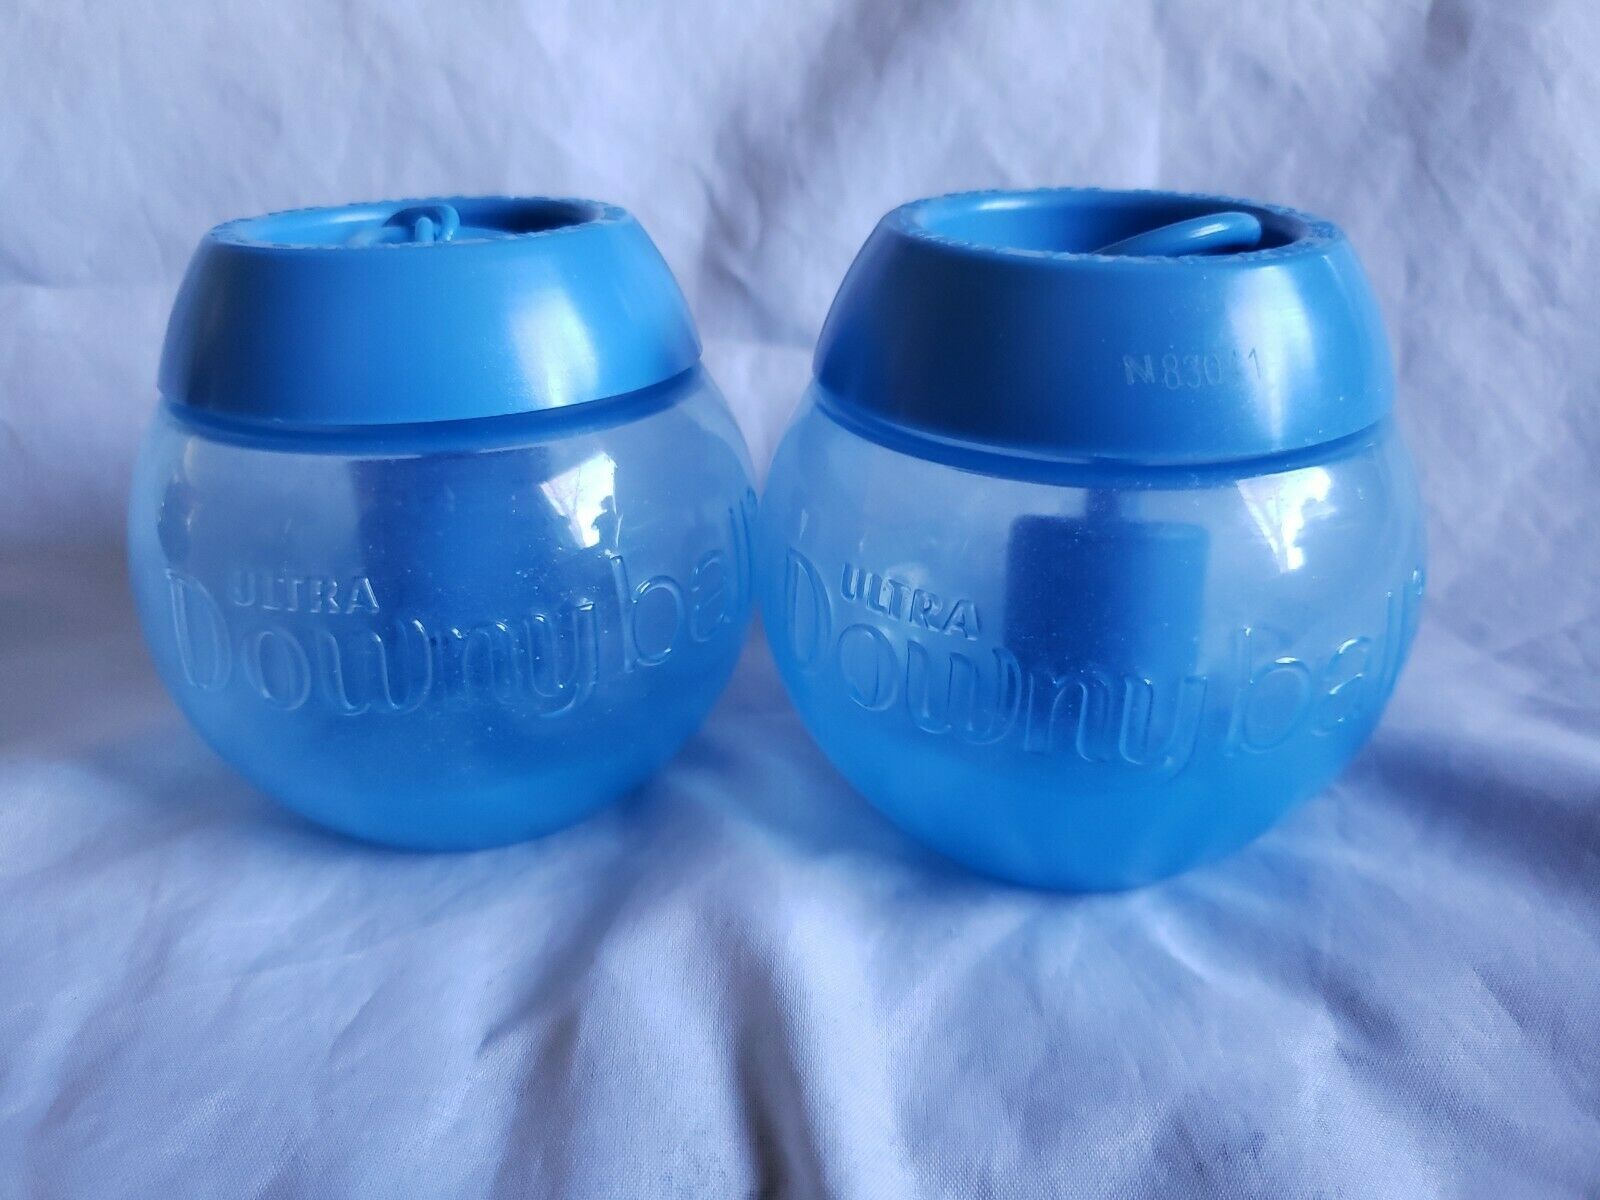 Details about   Vintage New Ultra Downy Fabric Softener Blue Plastic Dispenser Ball 1992 